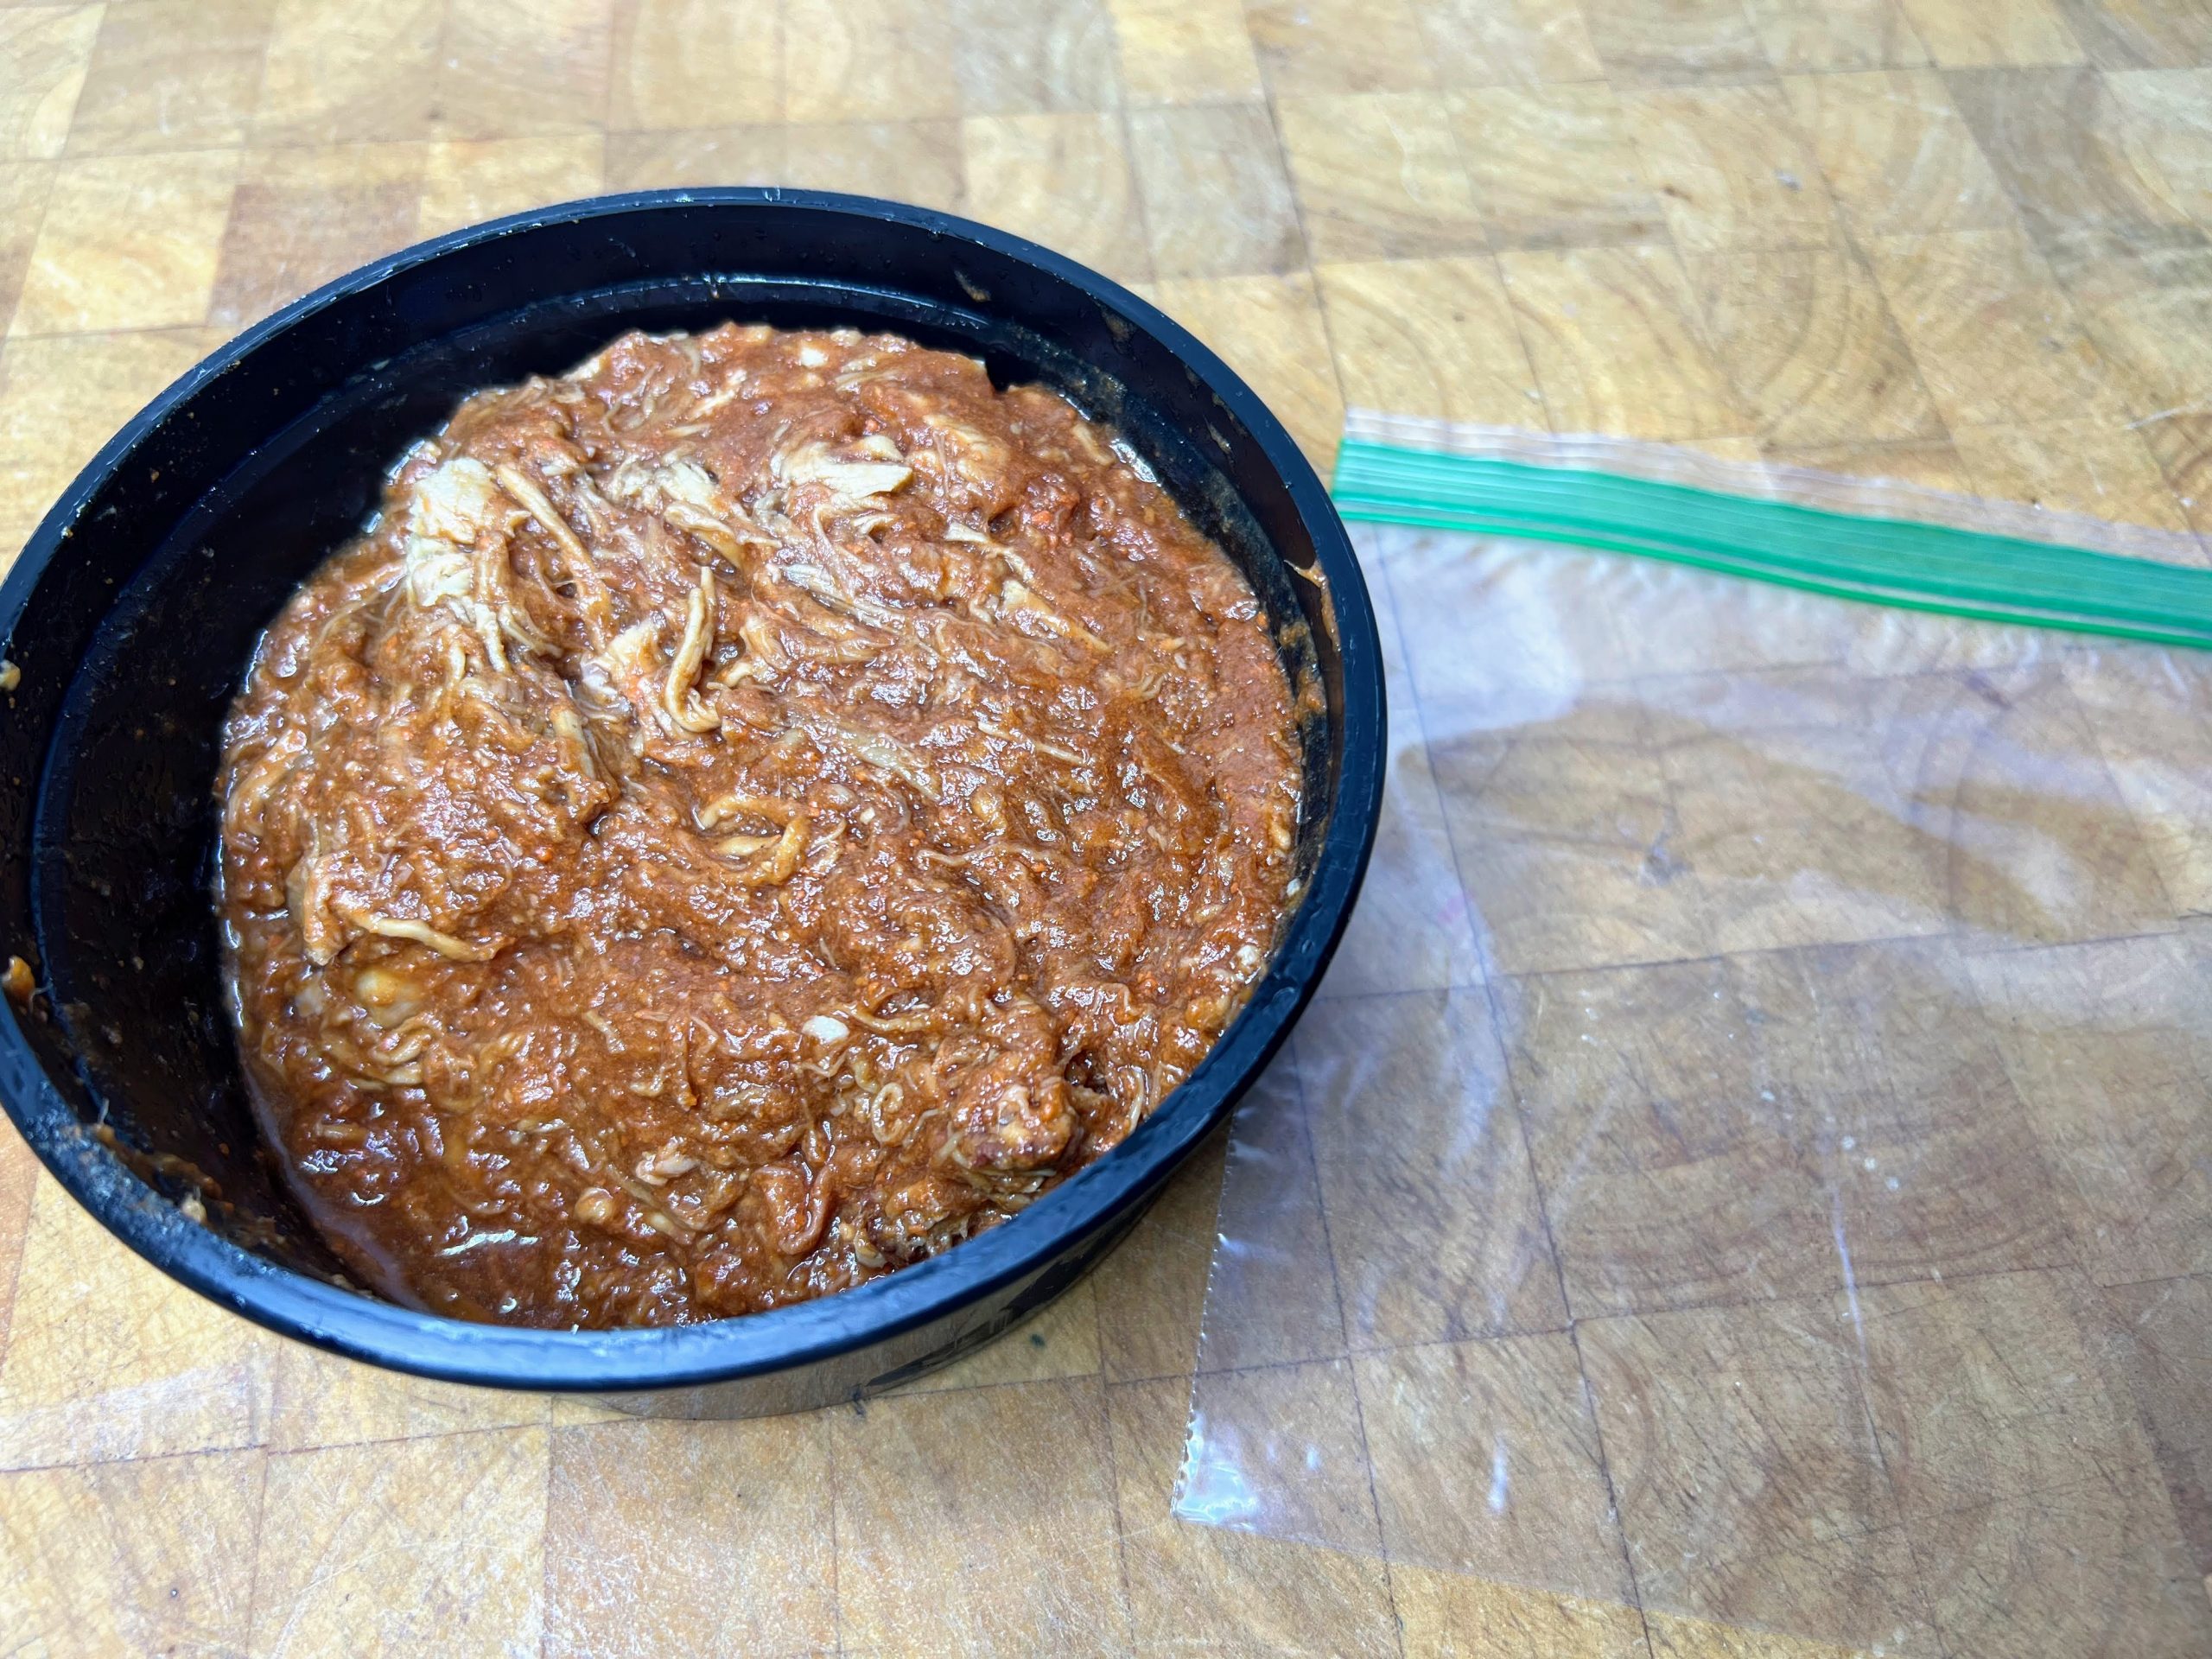 bowl of pulled pork next to an empty freezer bag